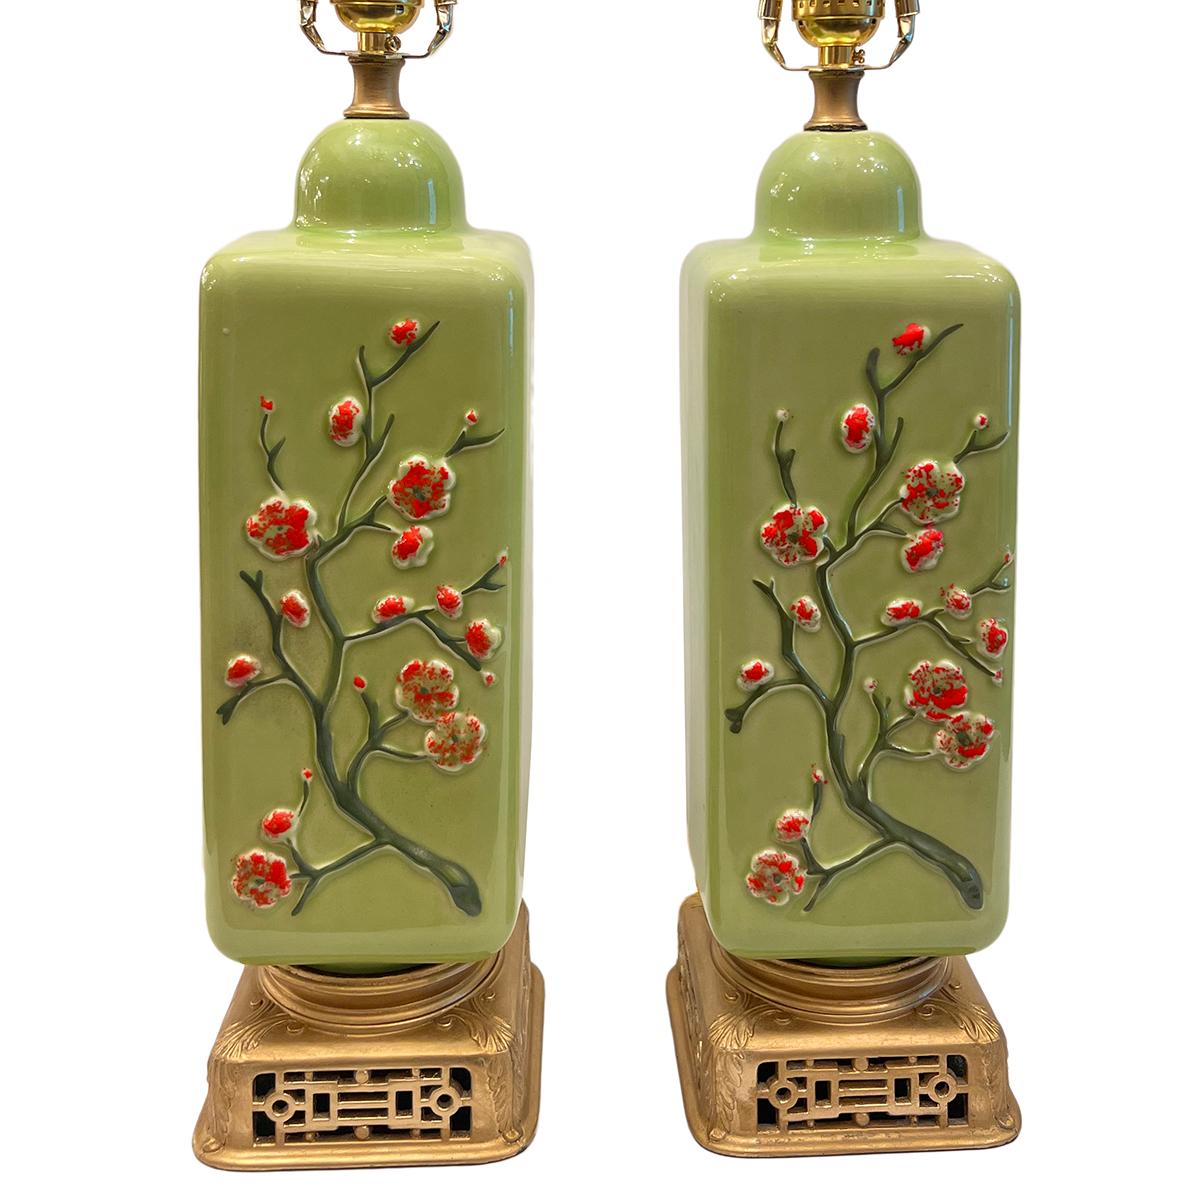 Pair of circa 1950's French celadon lamps with floral decoration.

Measurements:
Height of body: 15.75